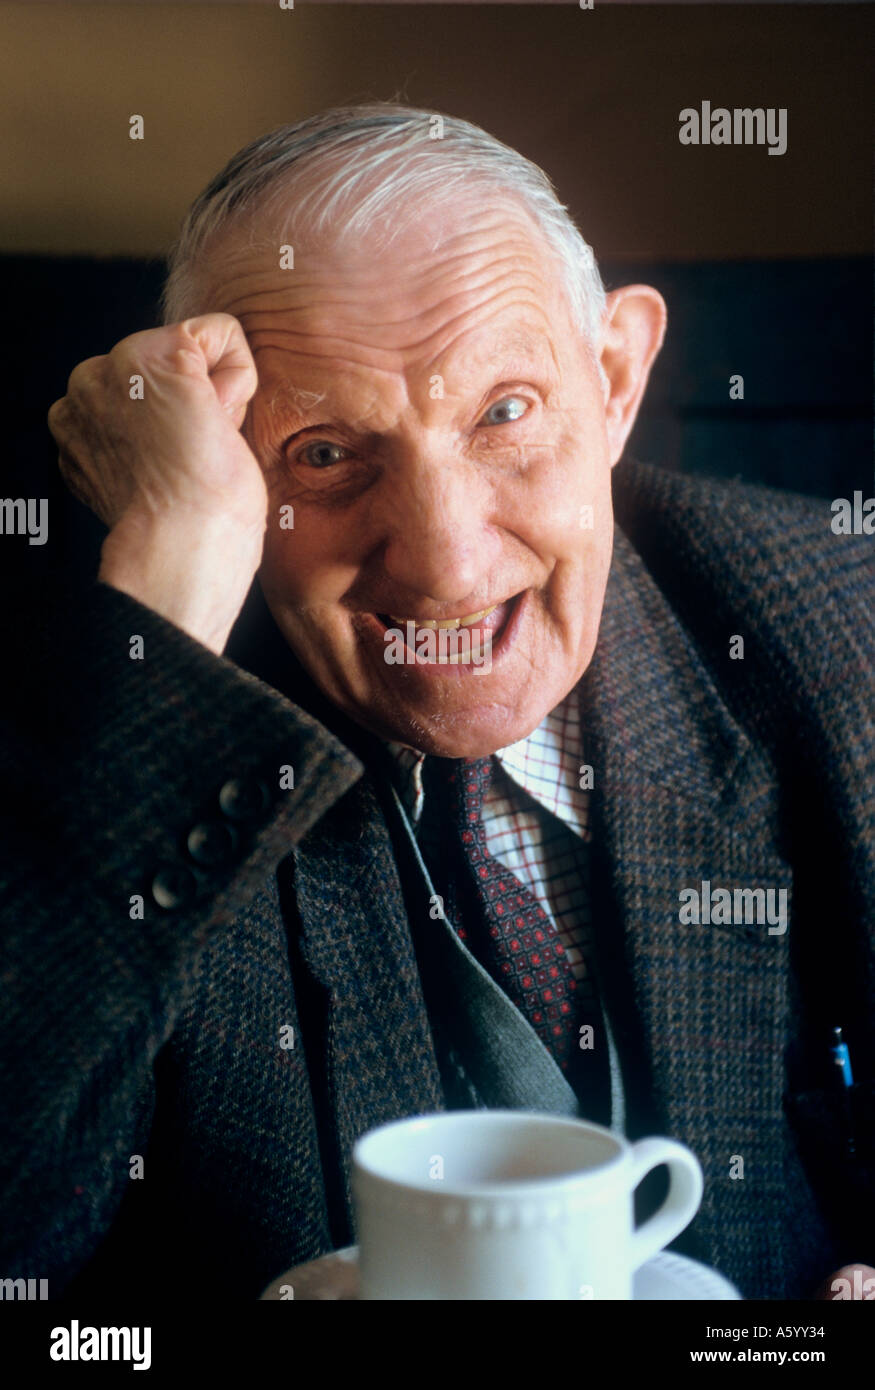 ELDERLY SENIOR MAN TEA LAUGHING LONGEVITY  Happy senior elderly man with health and vitality, at home, in natural light laughing over a cup of tea Stock Photo